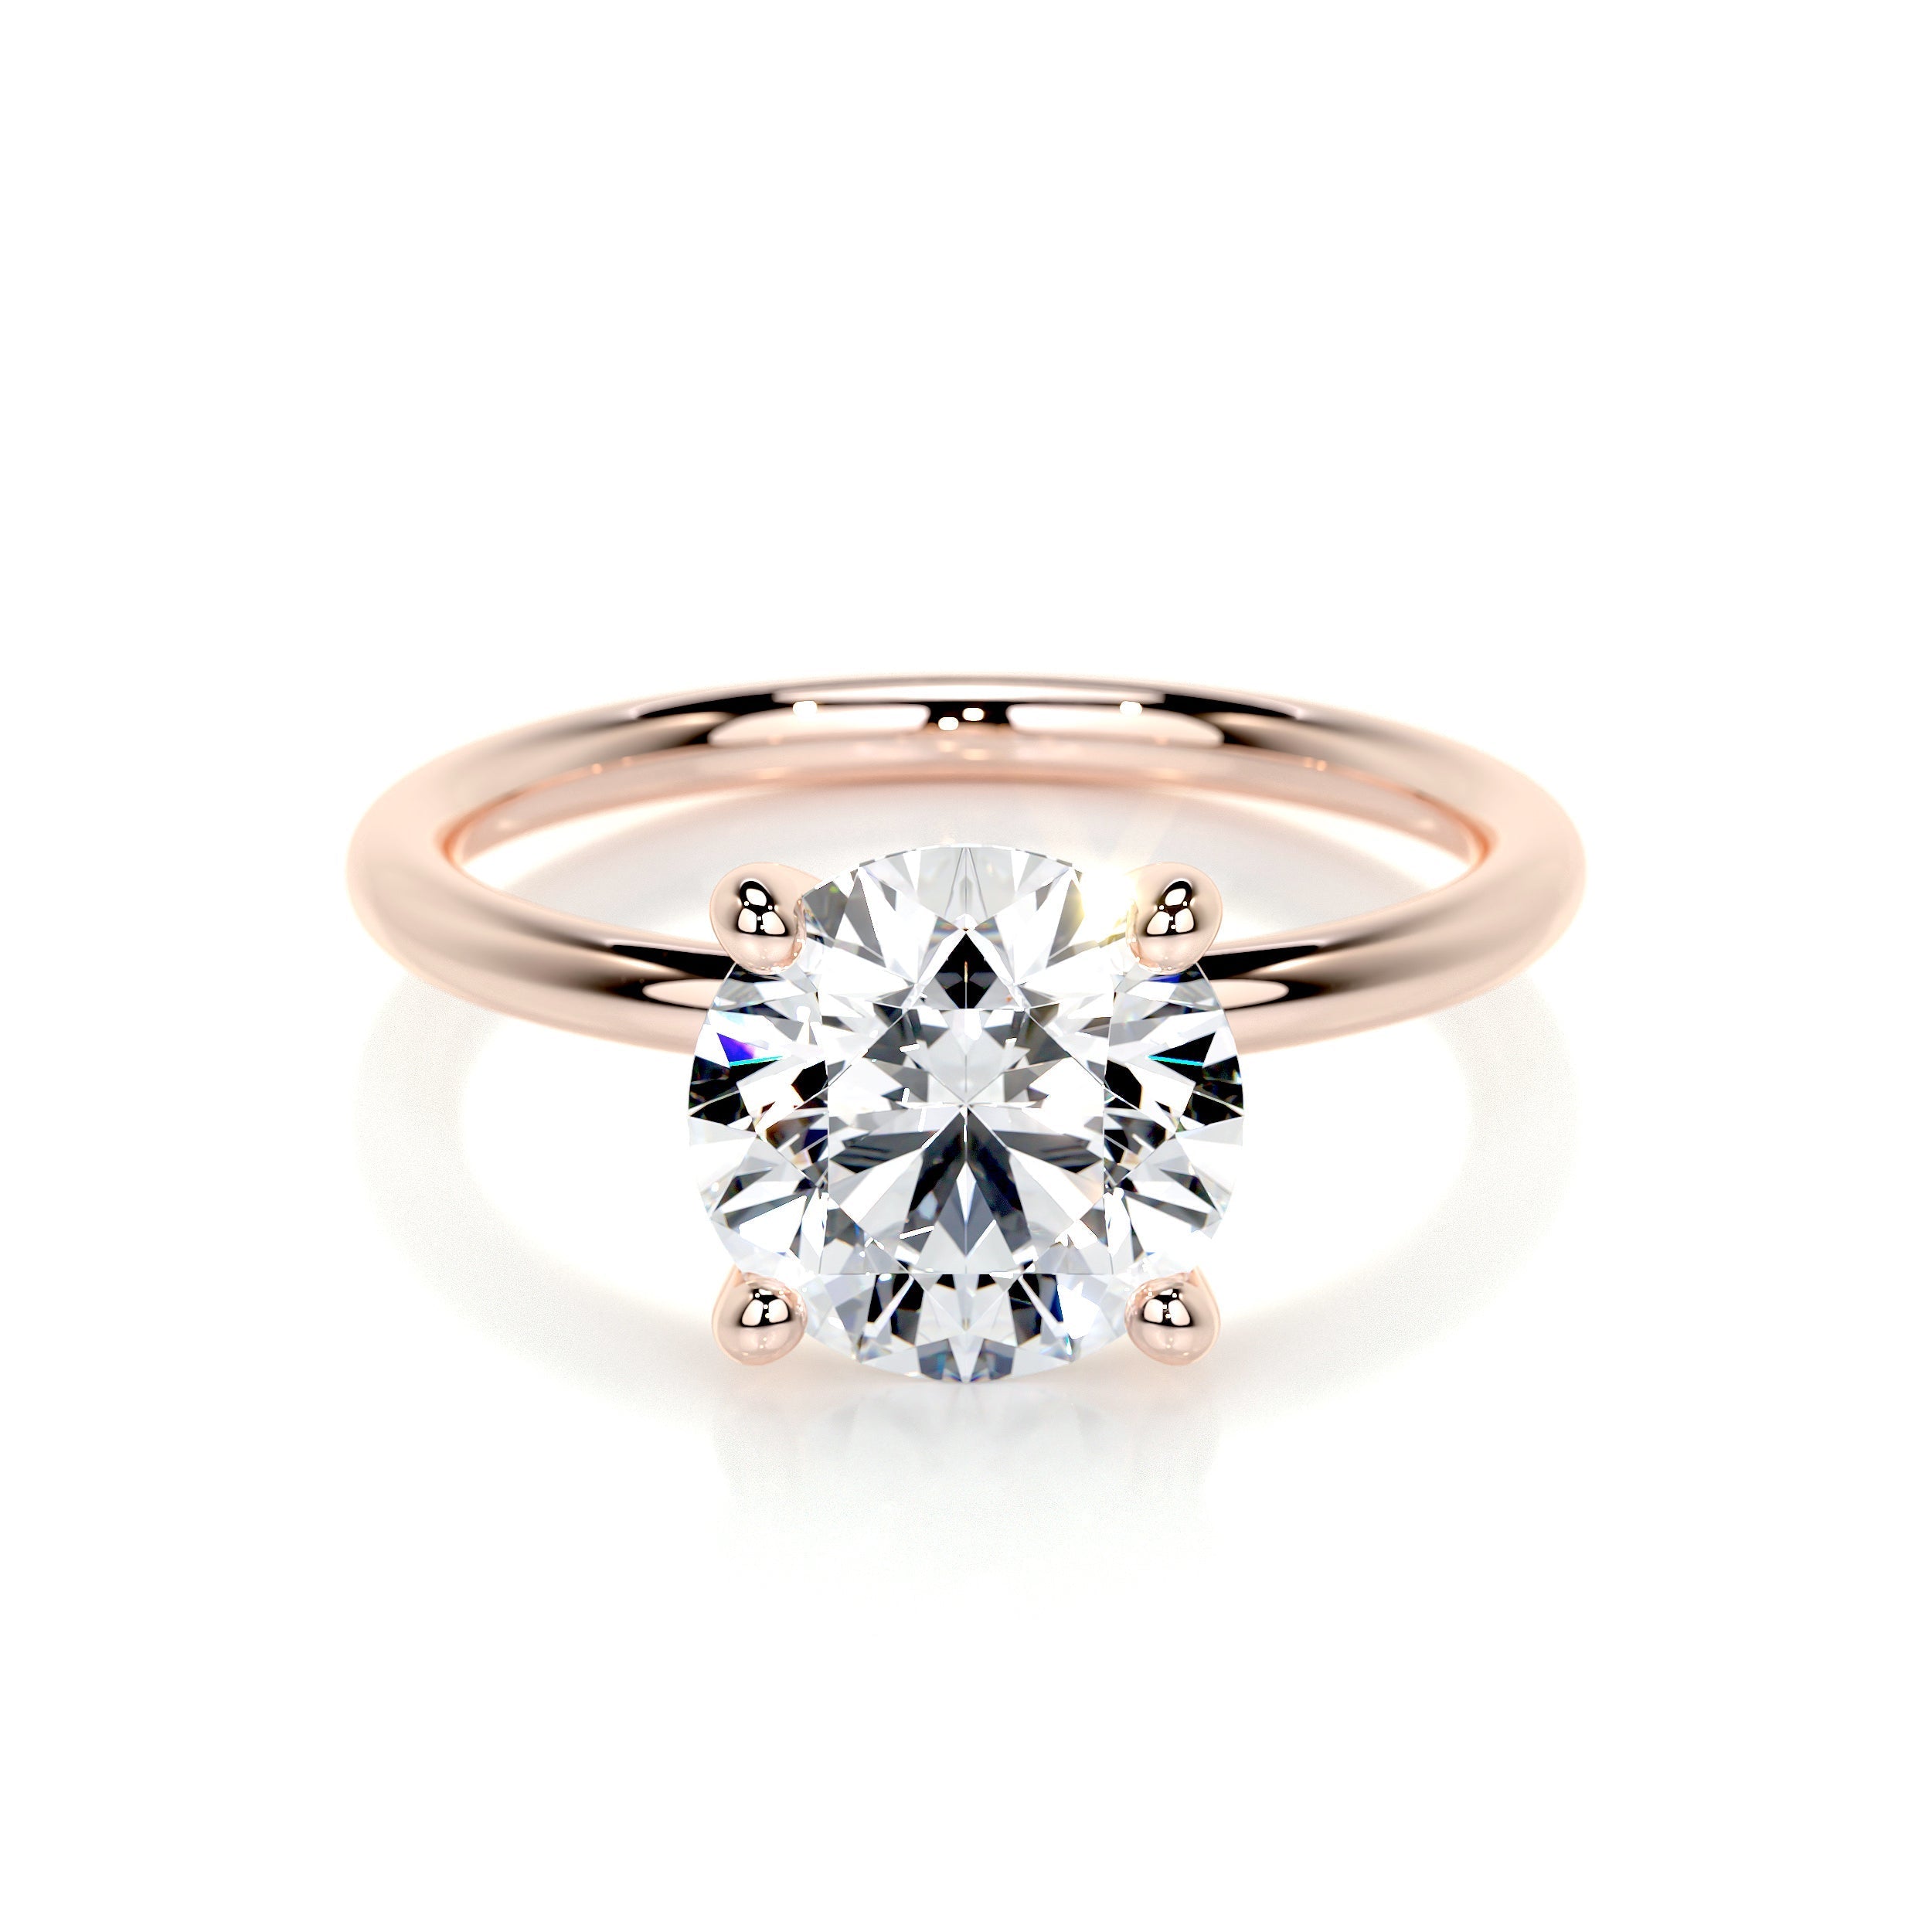 2.0 CT Round Solitaire CVD E/VS2 Diamond Engagement Ring 11